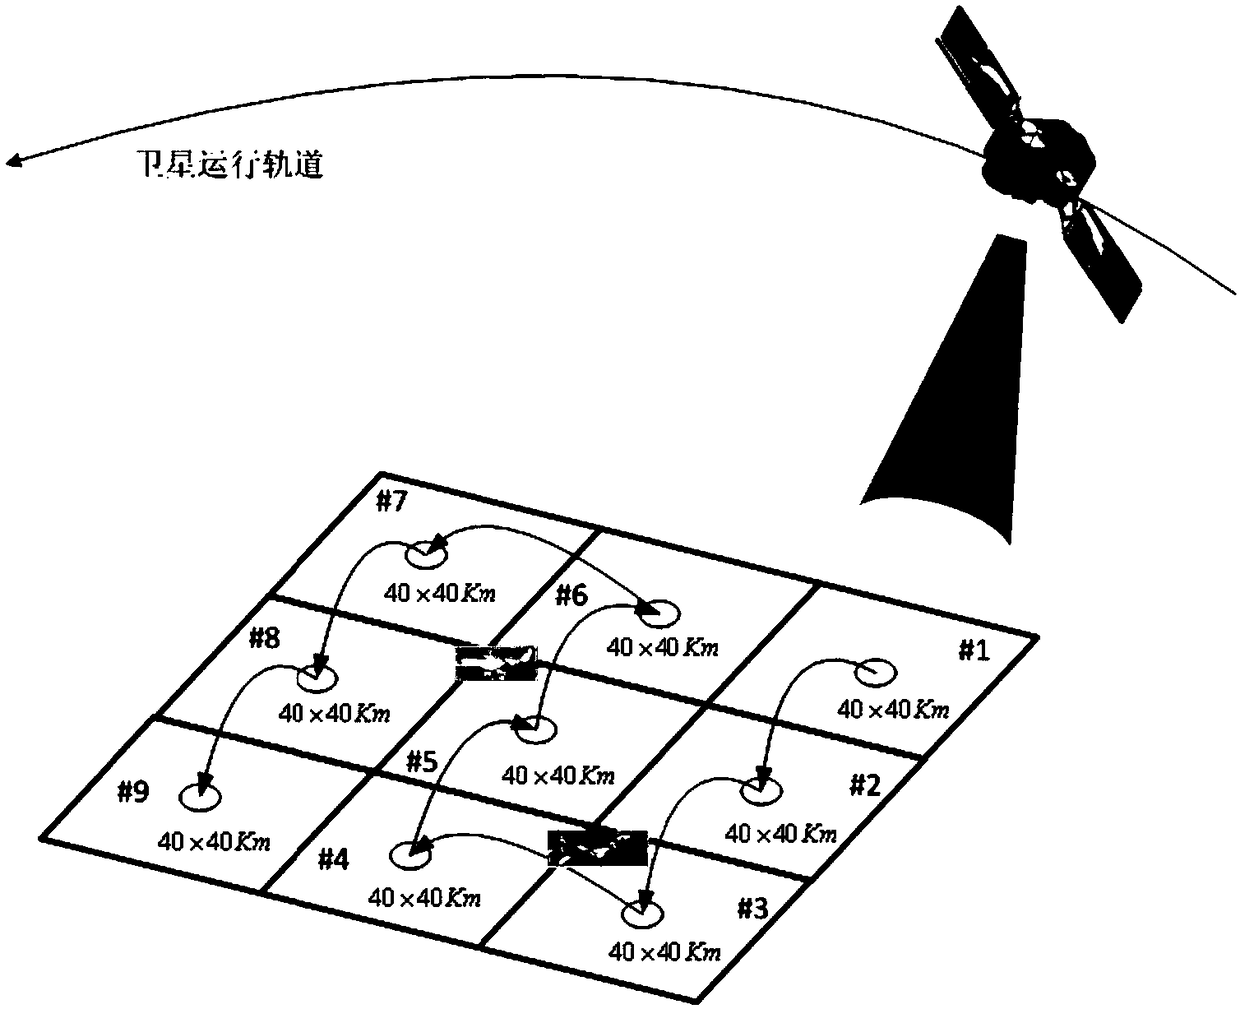 Pan-tilt pointing and satellite attitude cooperative control method for air moving target tracking